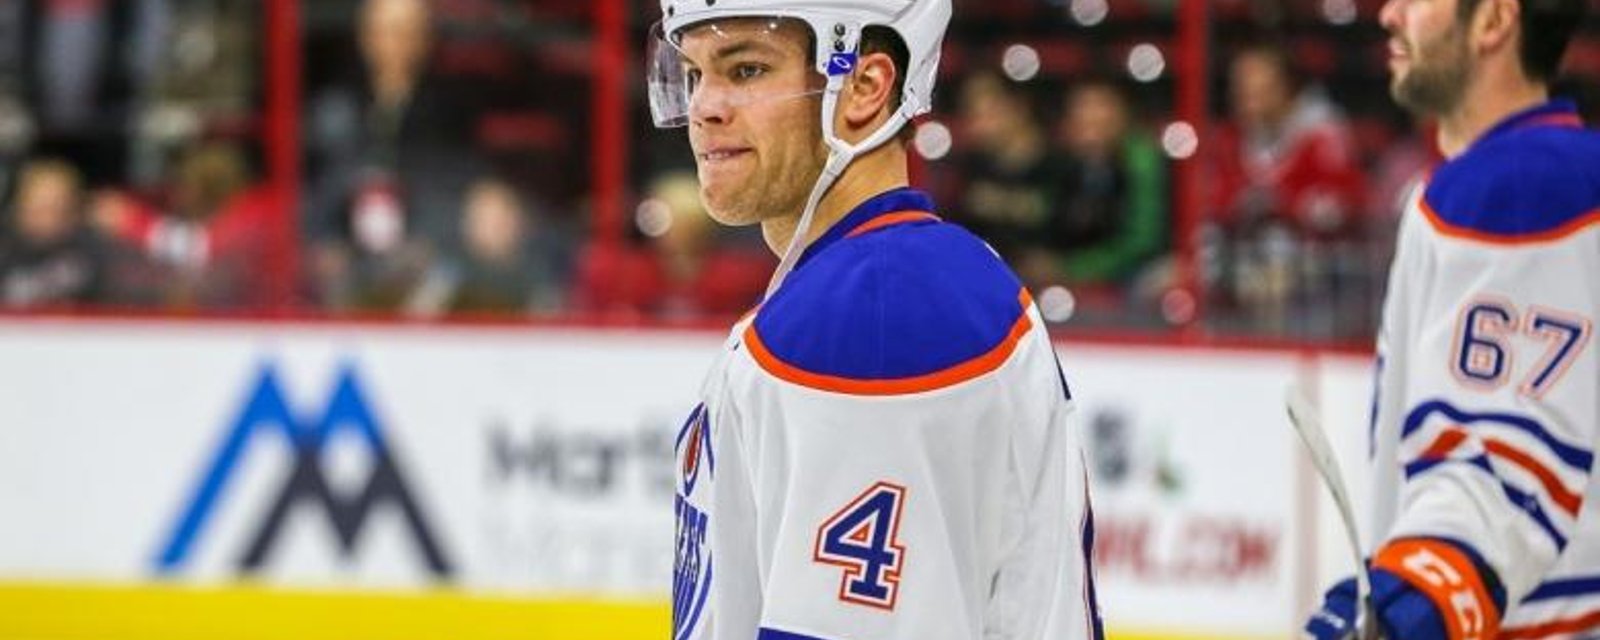 Taylor Hall explains the motivation behind his new number.